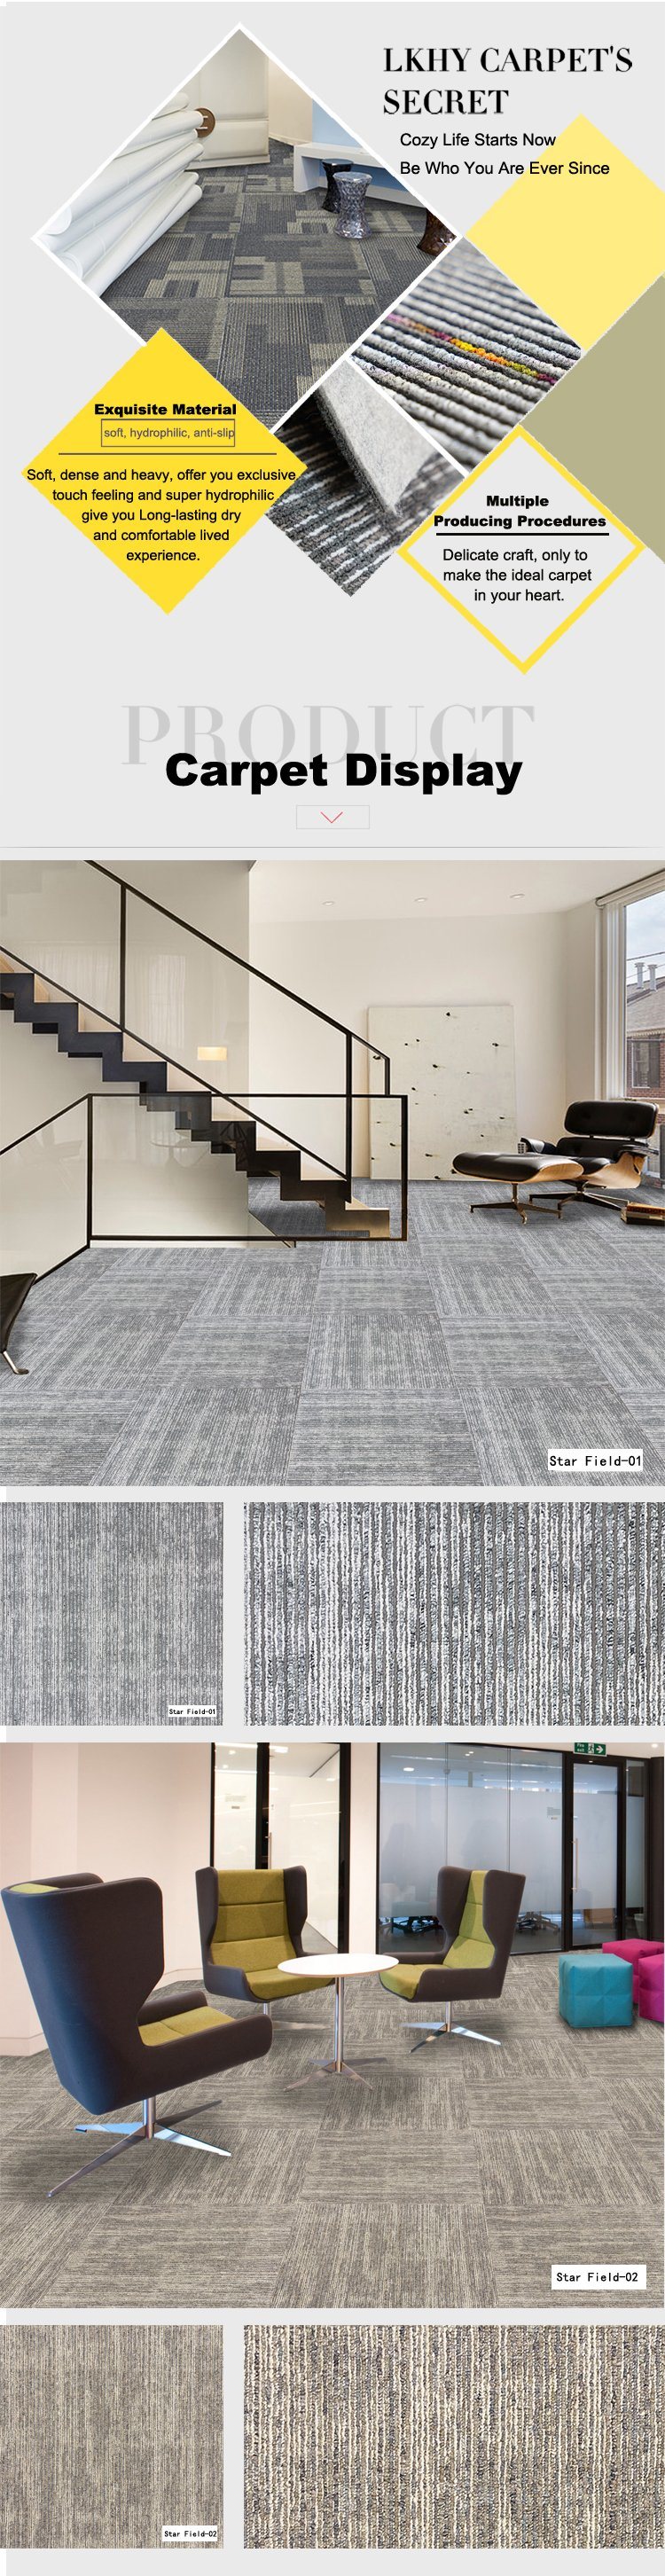 1/12 Star Field Office Carpet Tile with PVC Backing